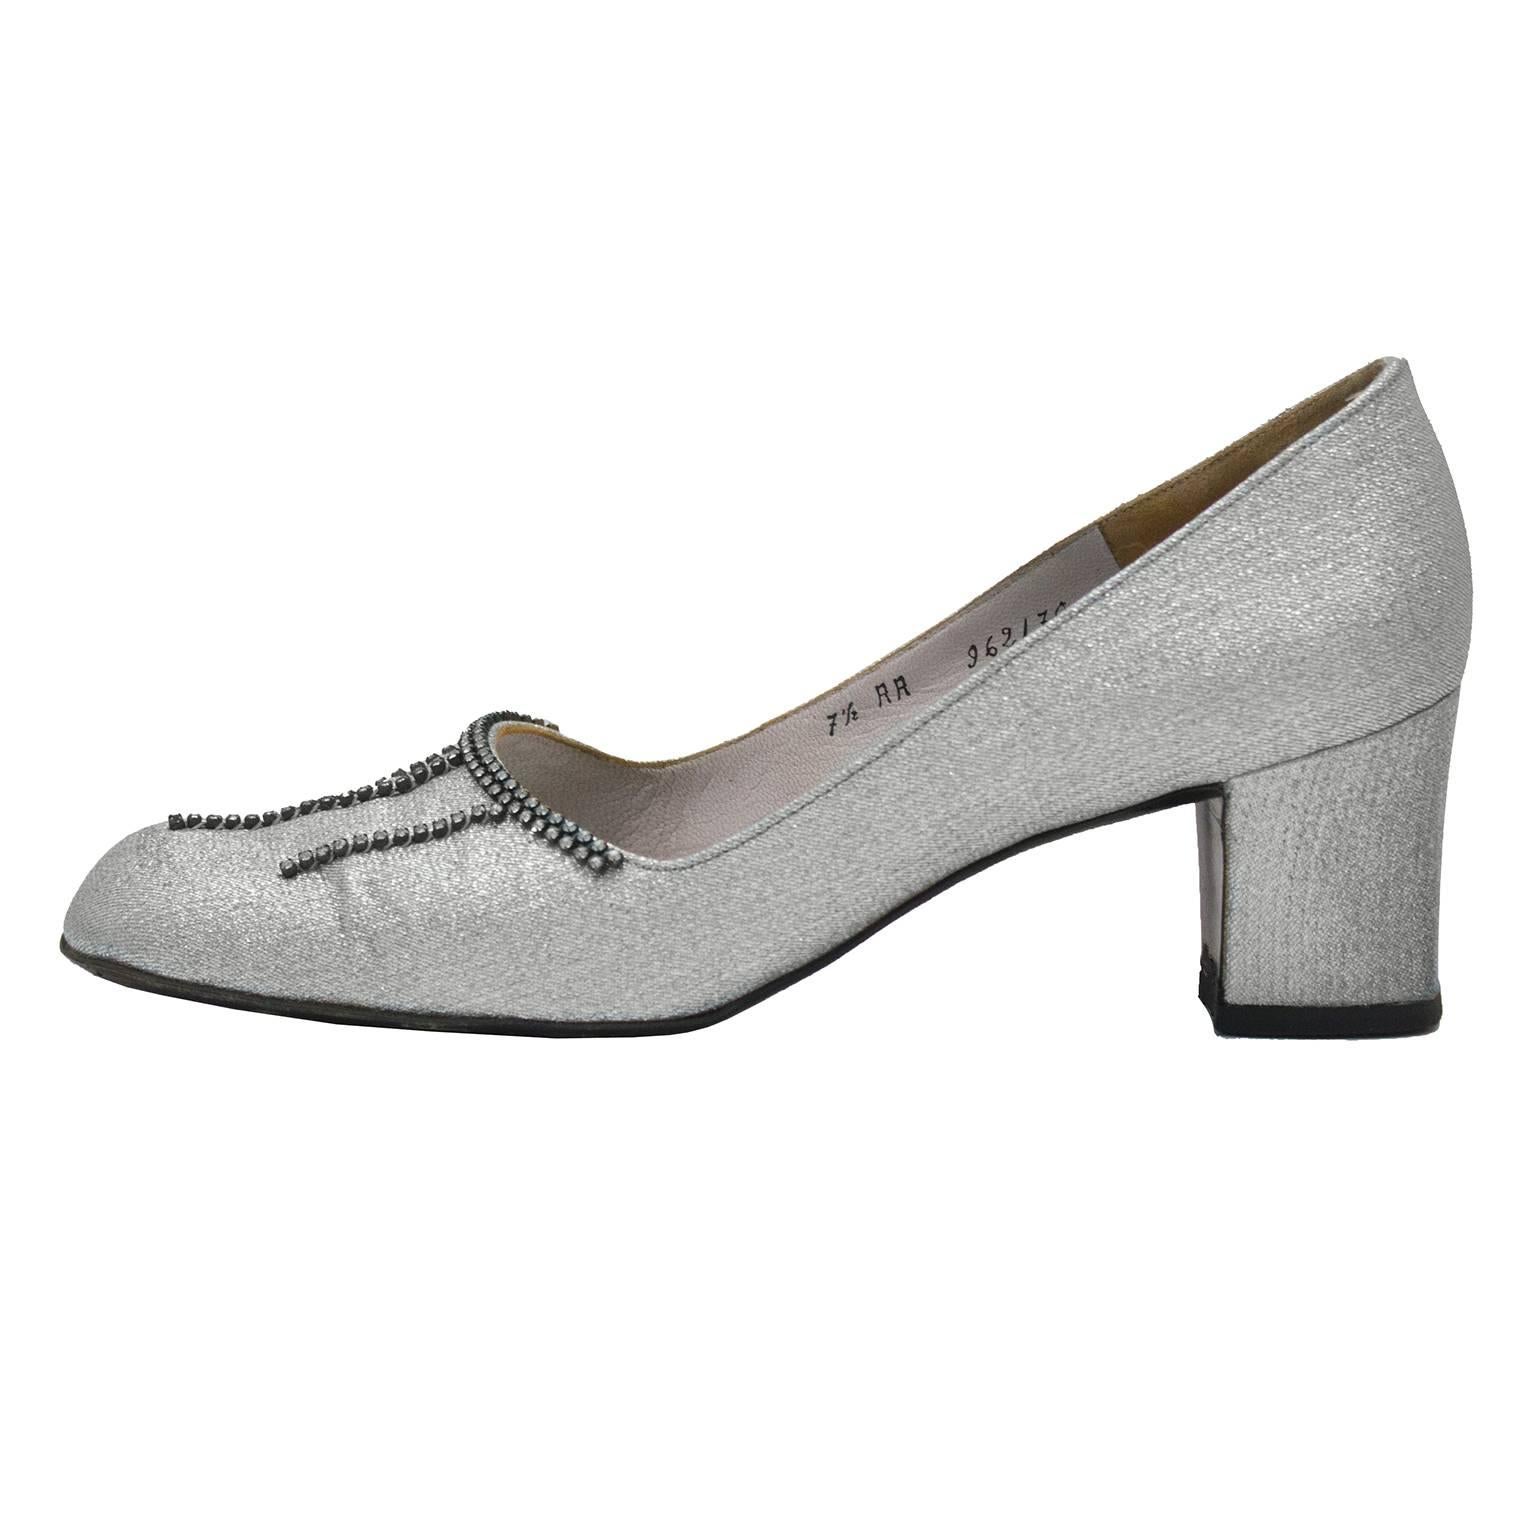 Christian Dior Souliers couture silver brocade round toe chunky heels from the 1960's. The toe of the shoes feature diamante detail and the insole is covered in a matching silver leather. Covered low heel with slight signs of wear. Marked a 7.5 AA 